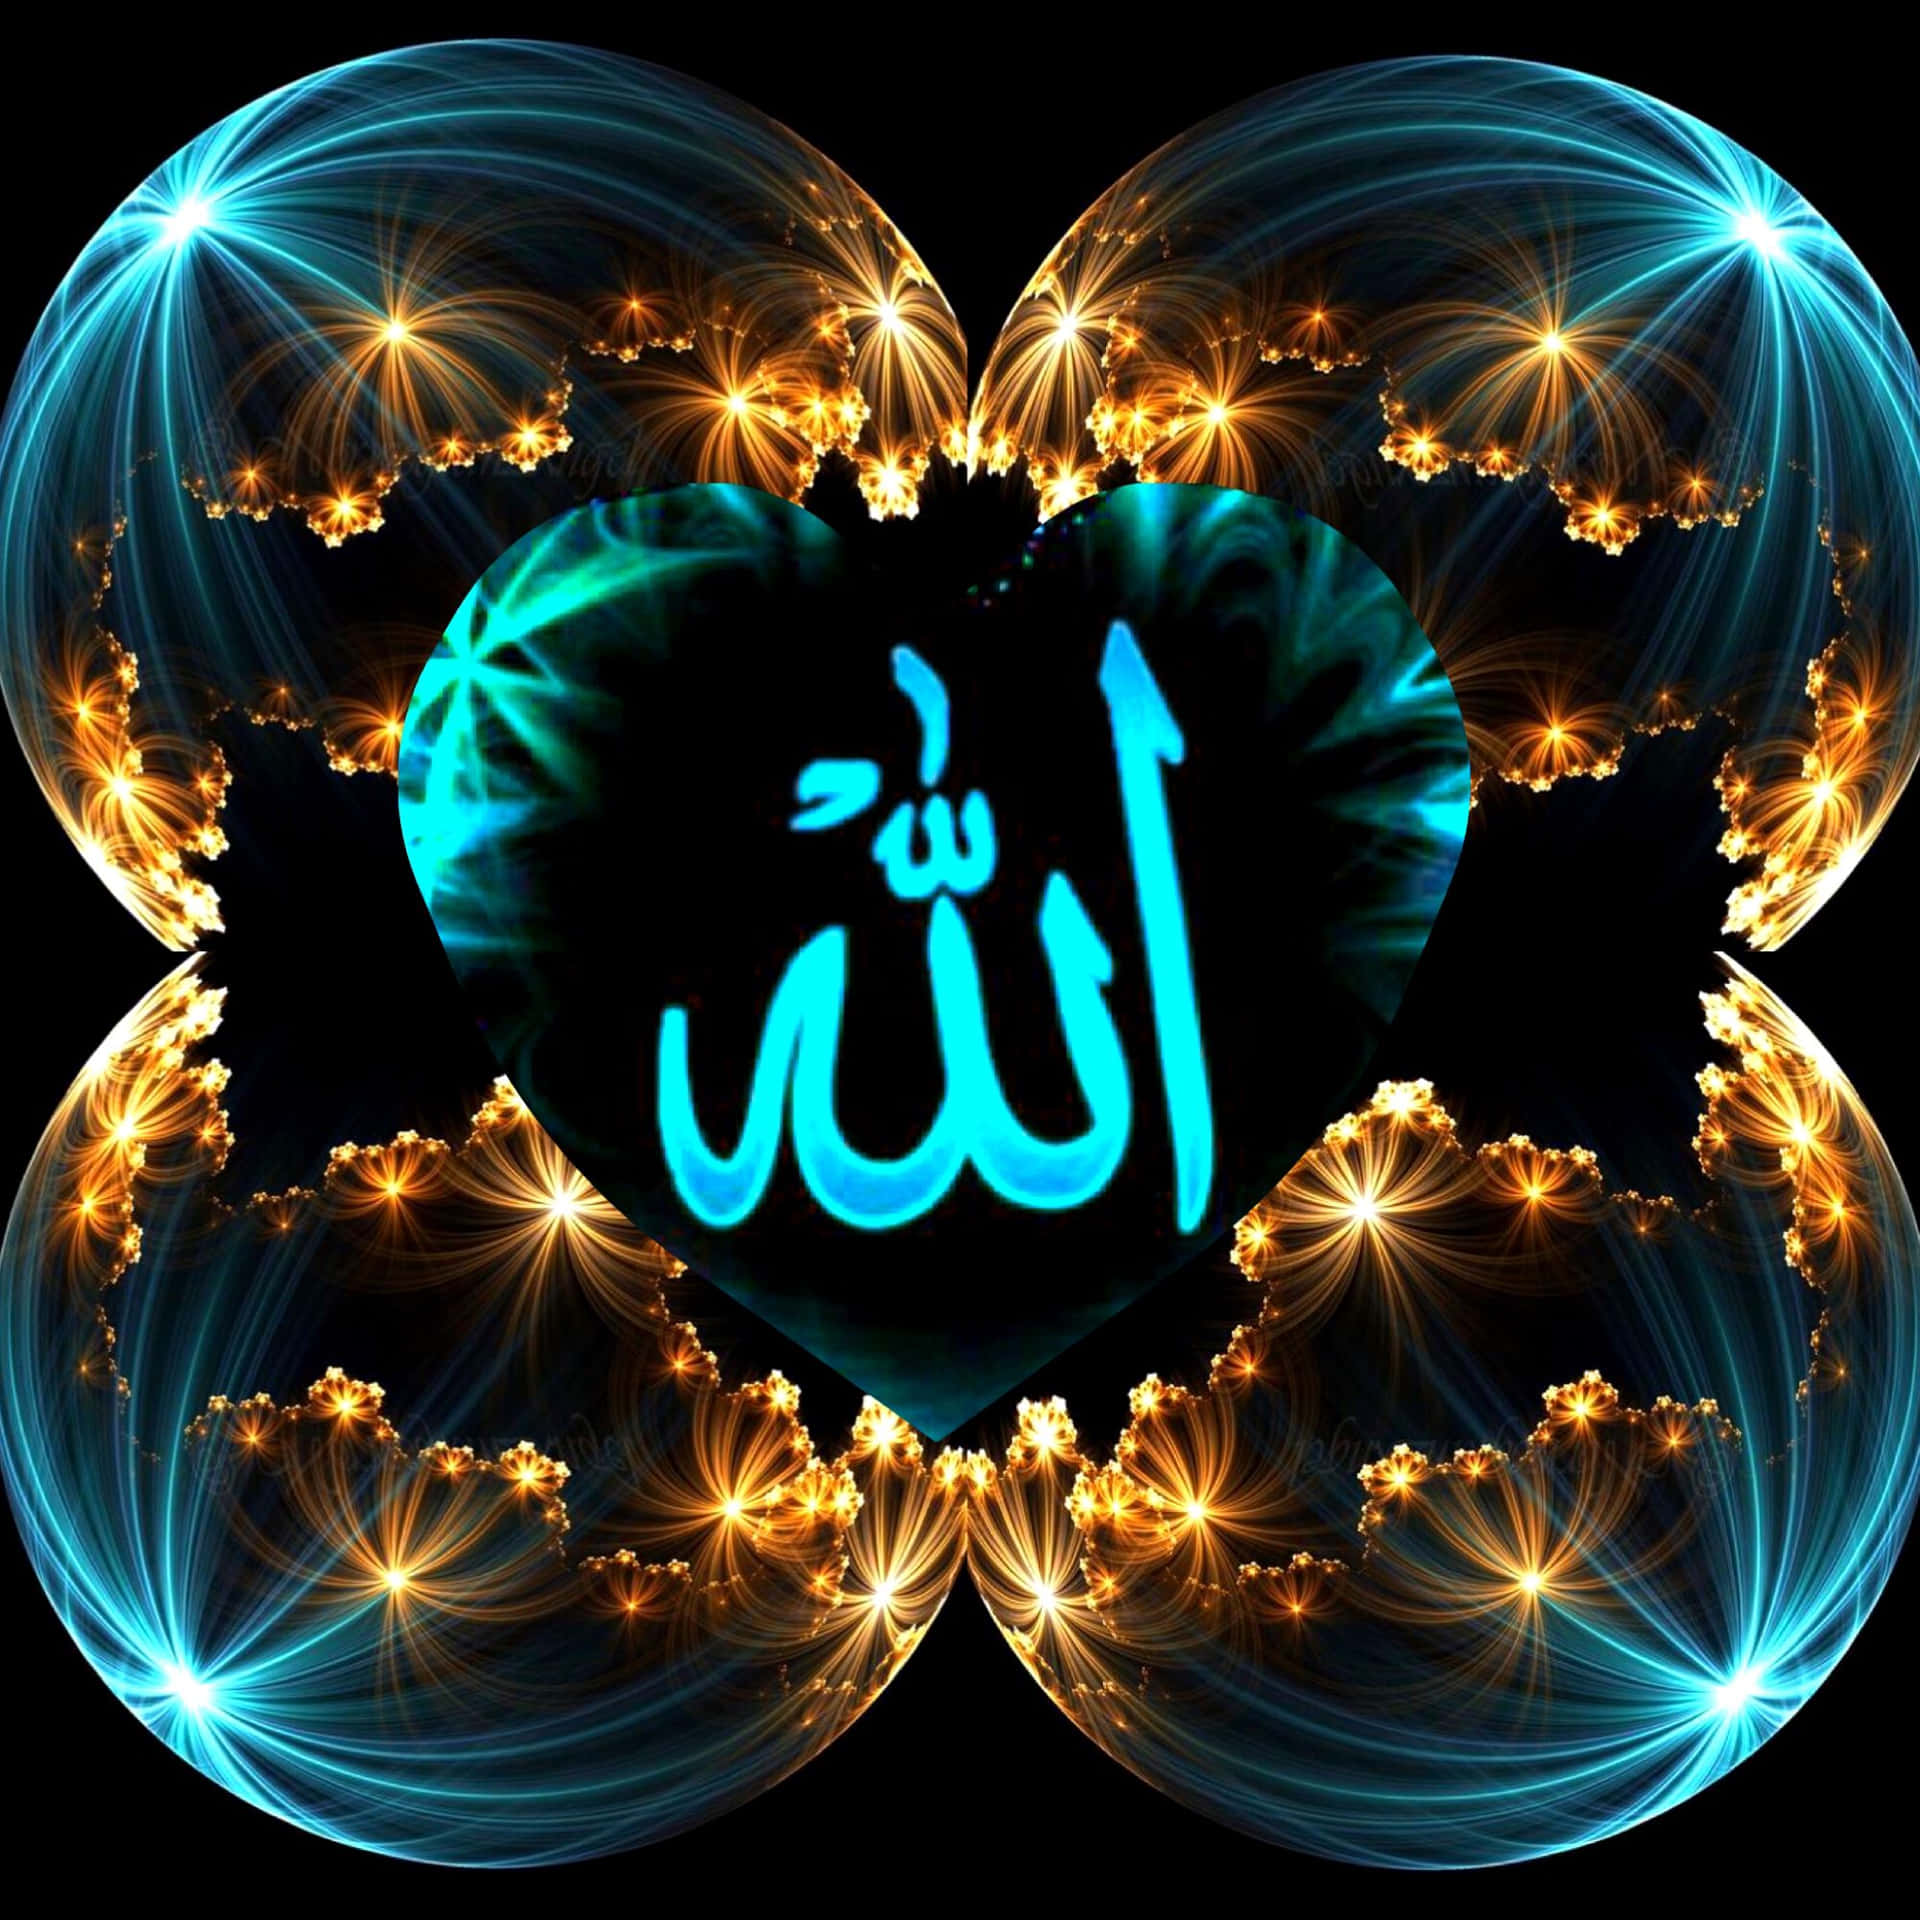 Allah, the Almighty